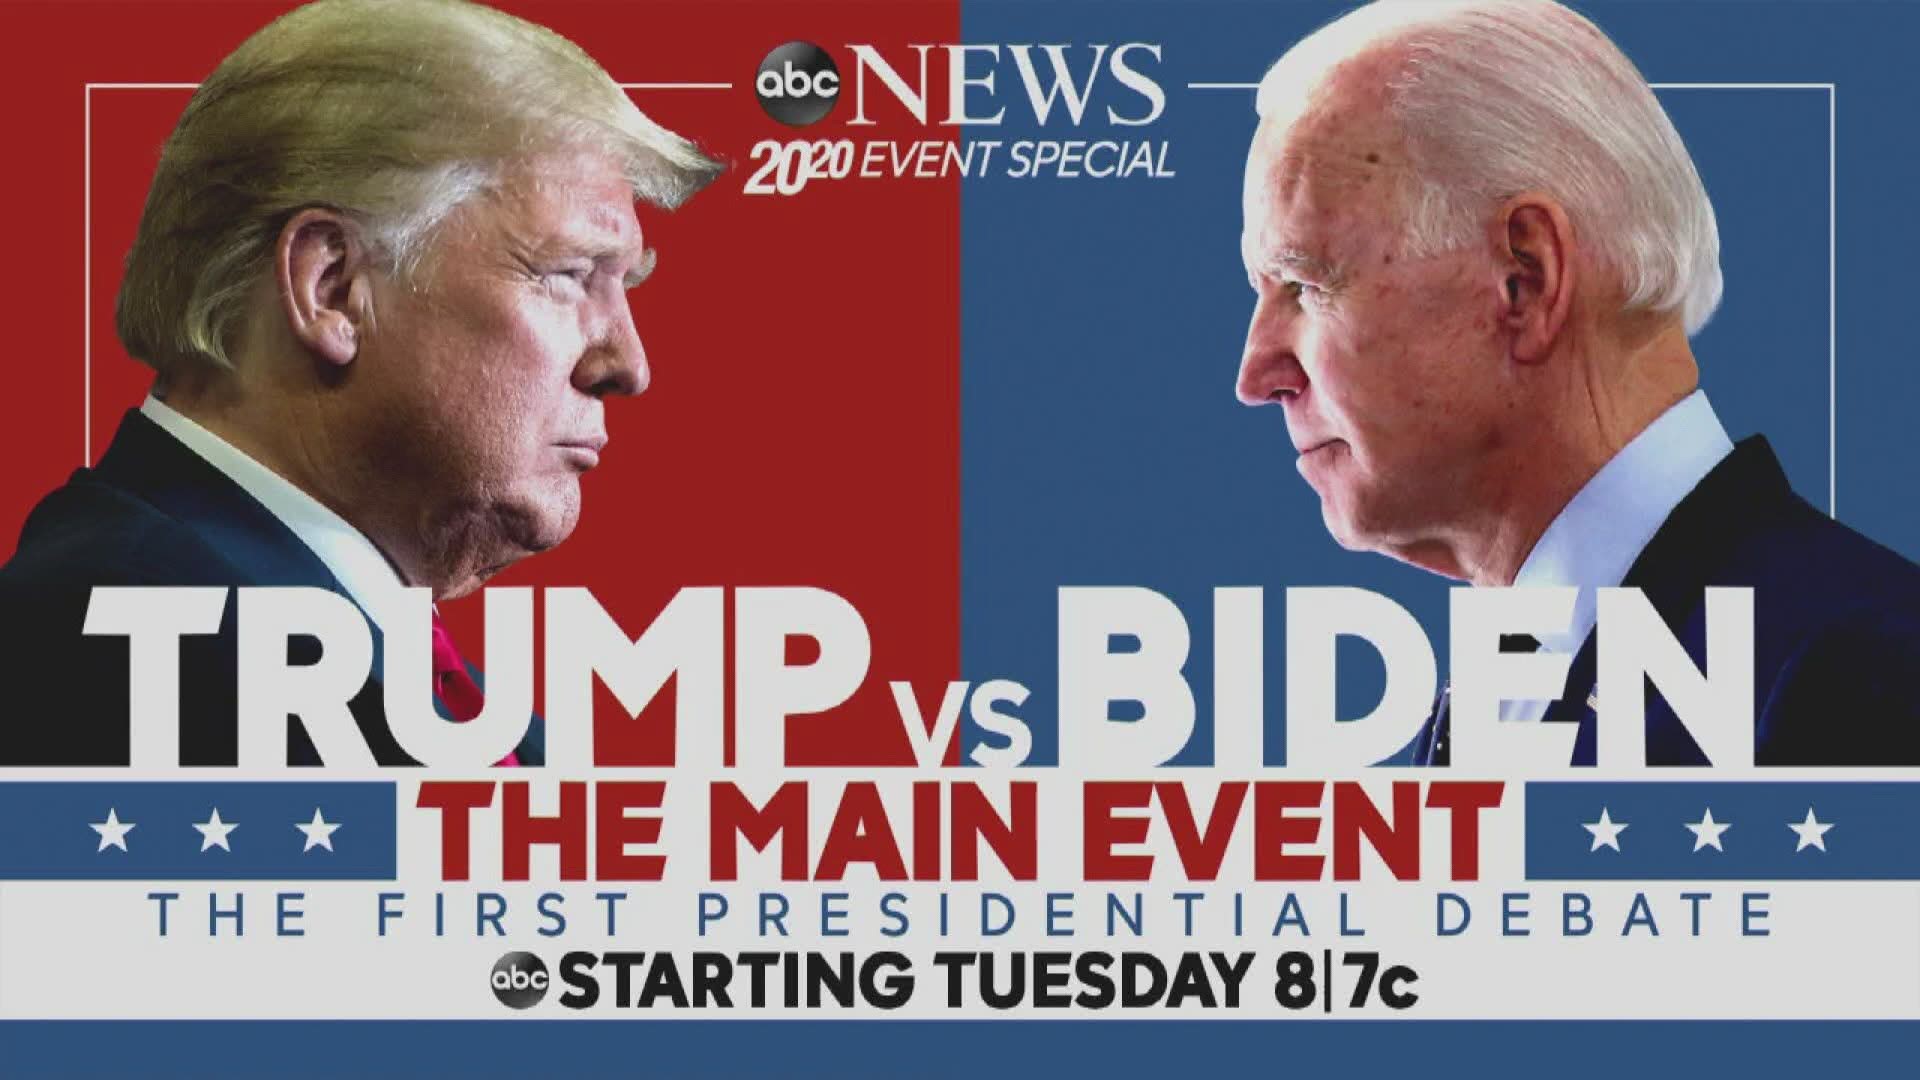 Michigan is a battleground state and with the first presidential debate Tuesday, we spoke with a political expert to learn what's at stake.